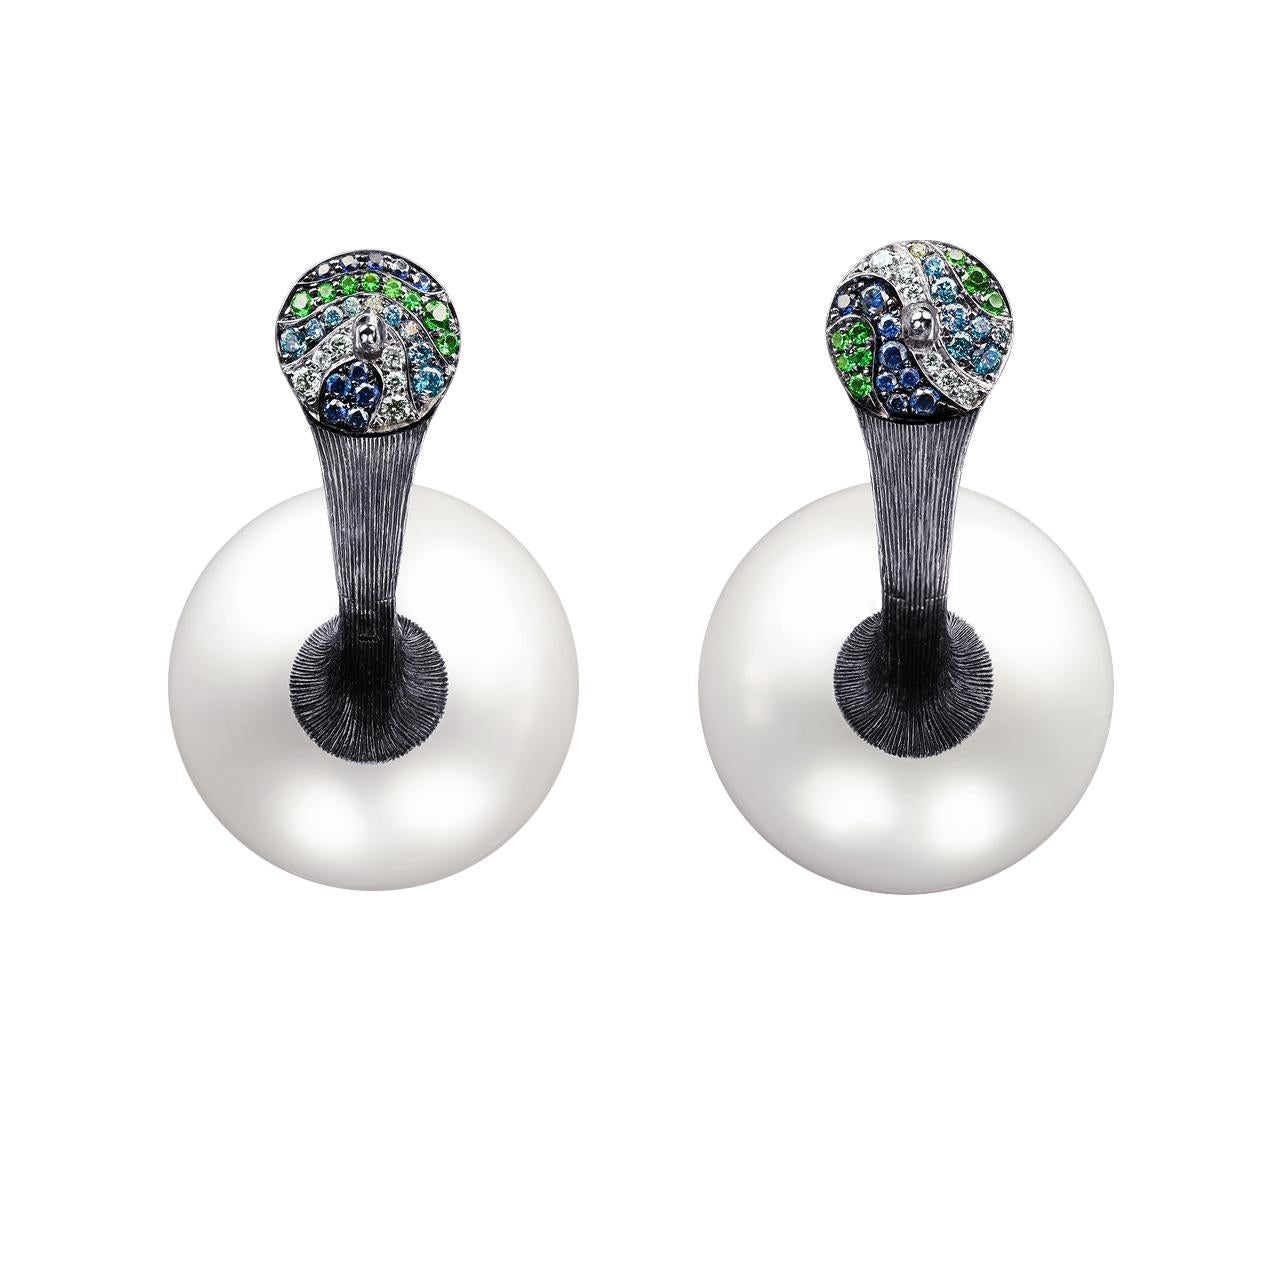 - 12 Round Diamonds – 0.06 ct, D-F/VVS
- 17 Round Blue Diamonds – 0.10 ct
- 18 Round Sapphires– 0.12 ct
- 15 Round Tsavorites– 0.08 ct
- 2 White South Sea pearls - 19.8 mm
- 18K White Gold 
- Weight: 27.01 g
Two perfectly matched lustrous White